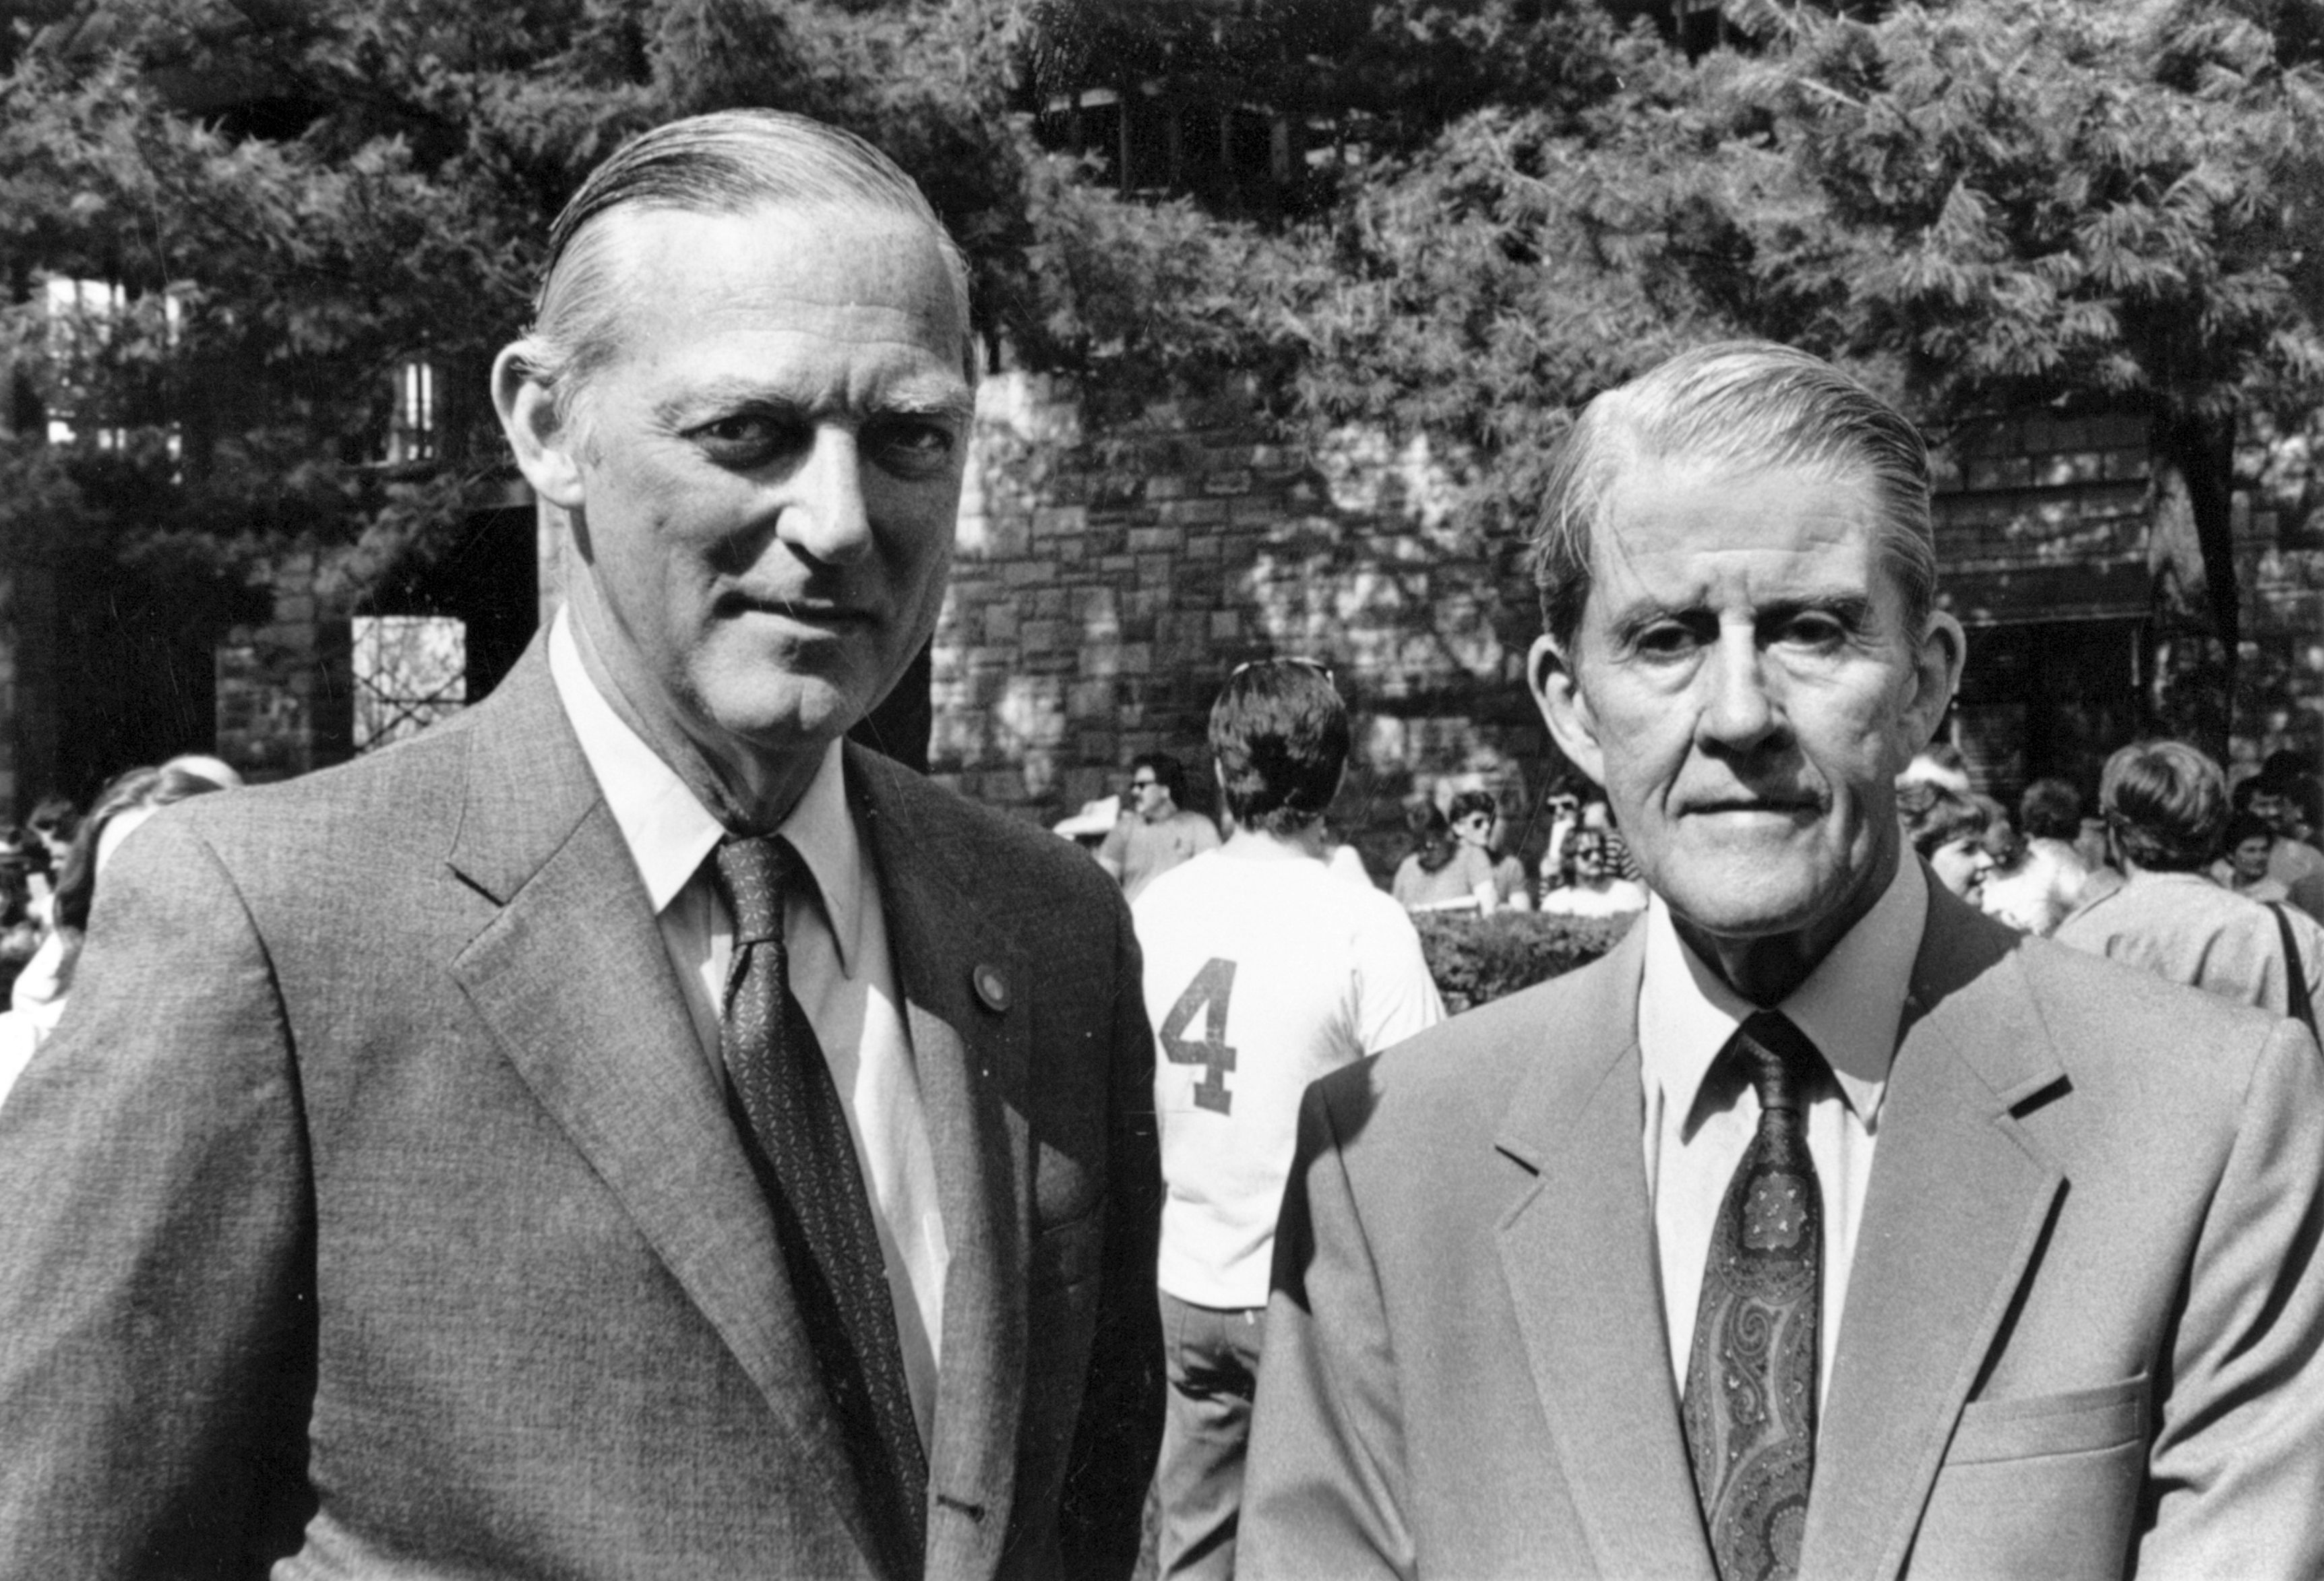 Ted Bassett and J. Keene Daingerfield, Jr. (Keeneland Library Thoroughbred Times Collection)